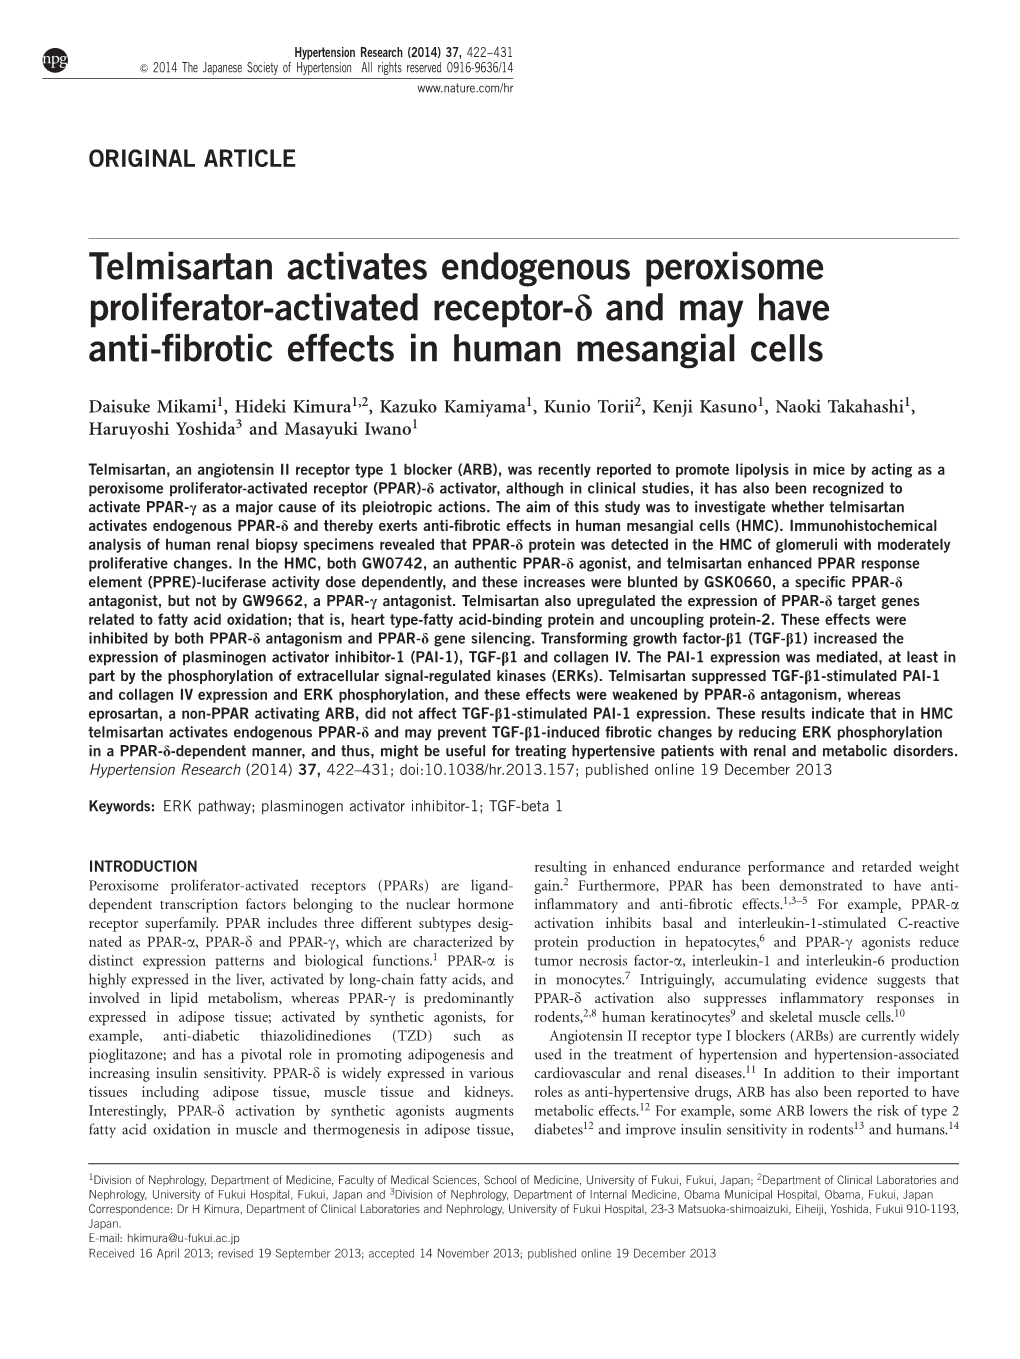 Telmisartan Activates Endogenous Peroxisome Proliferator-Activated Receptor-D and May Have Anti-ﬁbrotic Effects in Human Mesangial Cells